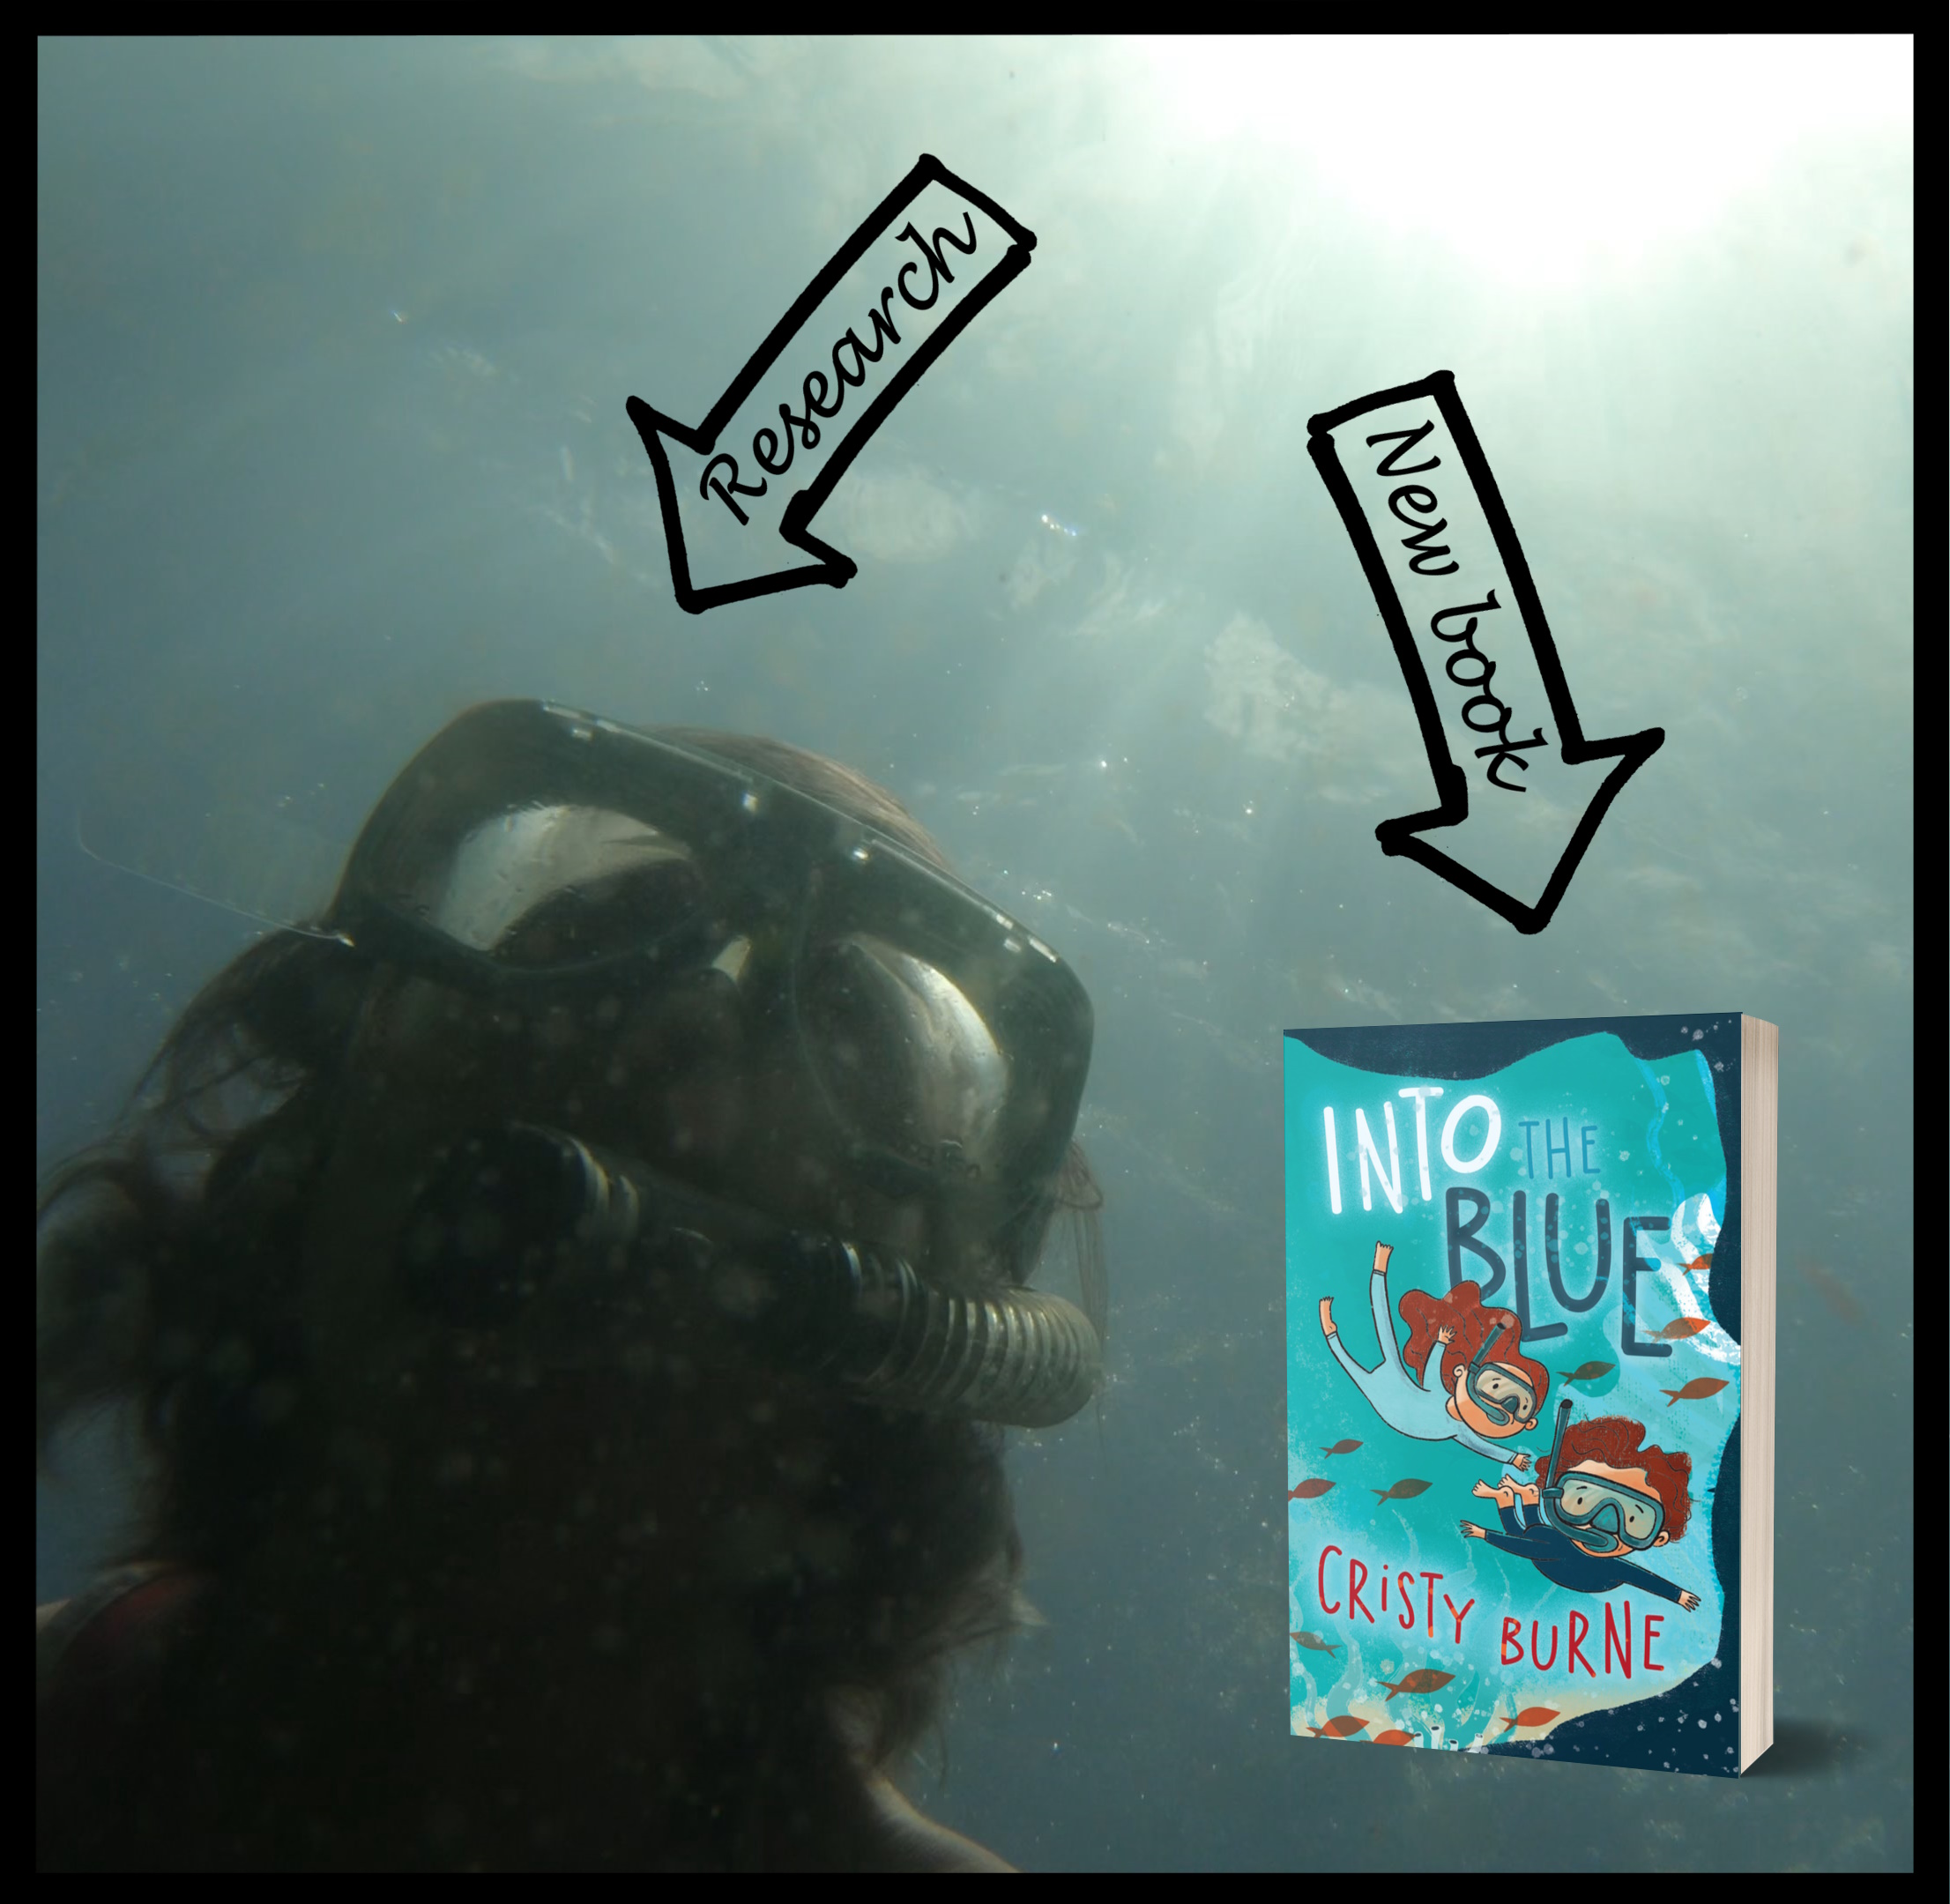 A photo of someone wearing a snorkel and goggles in murky water plus a book pasted on top.